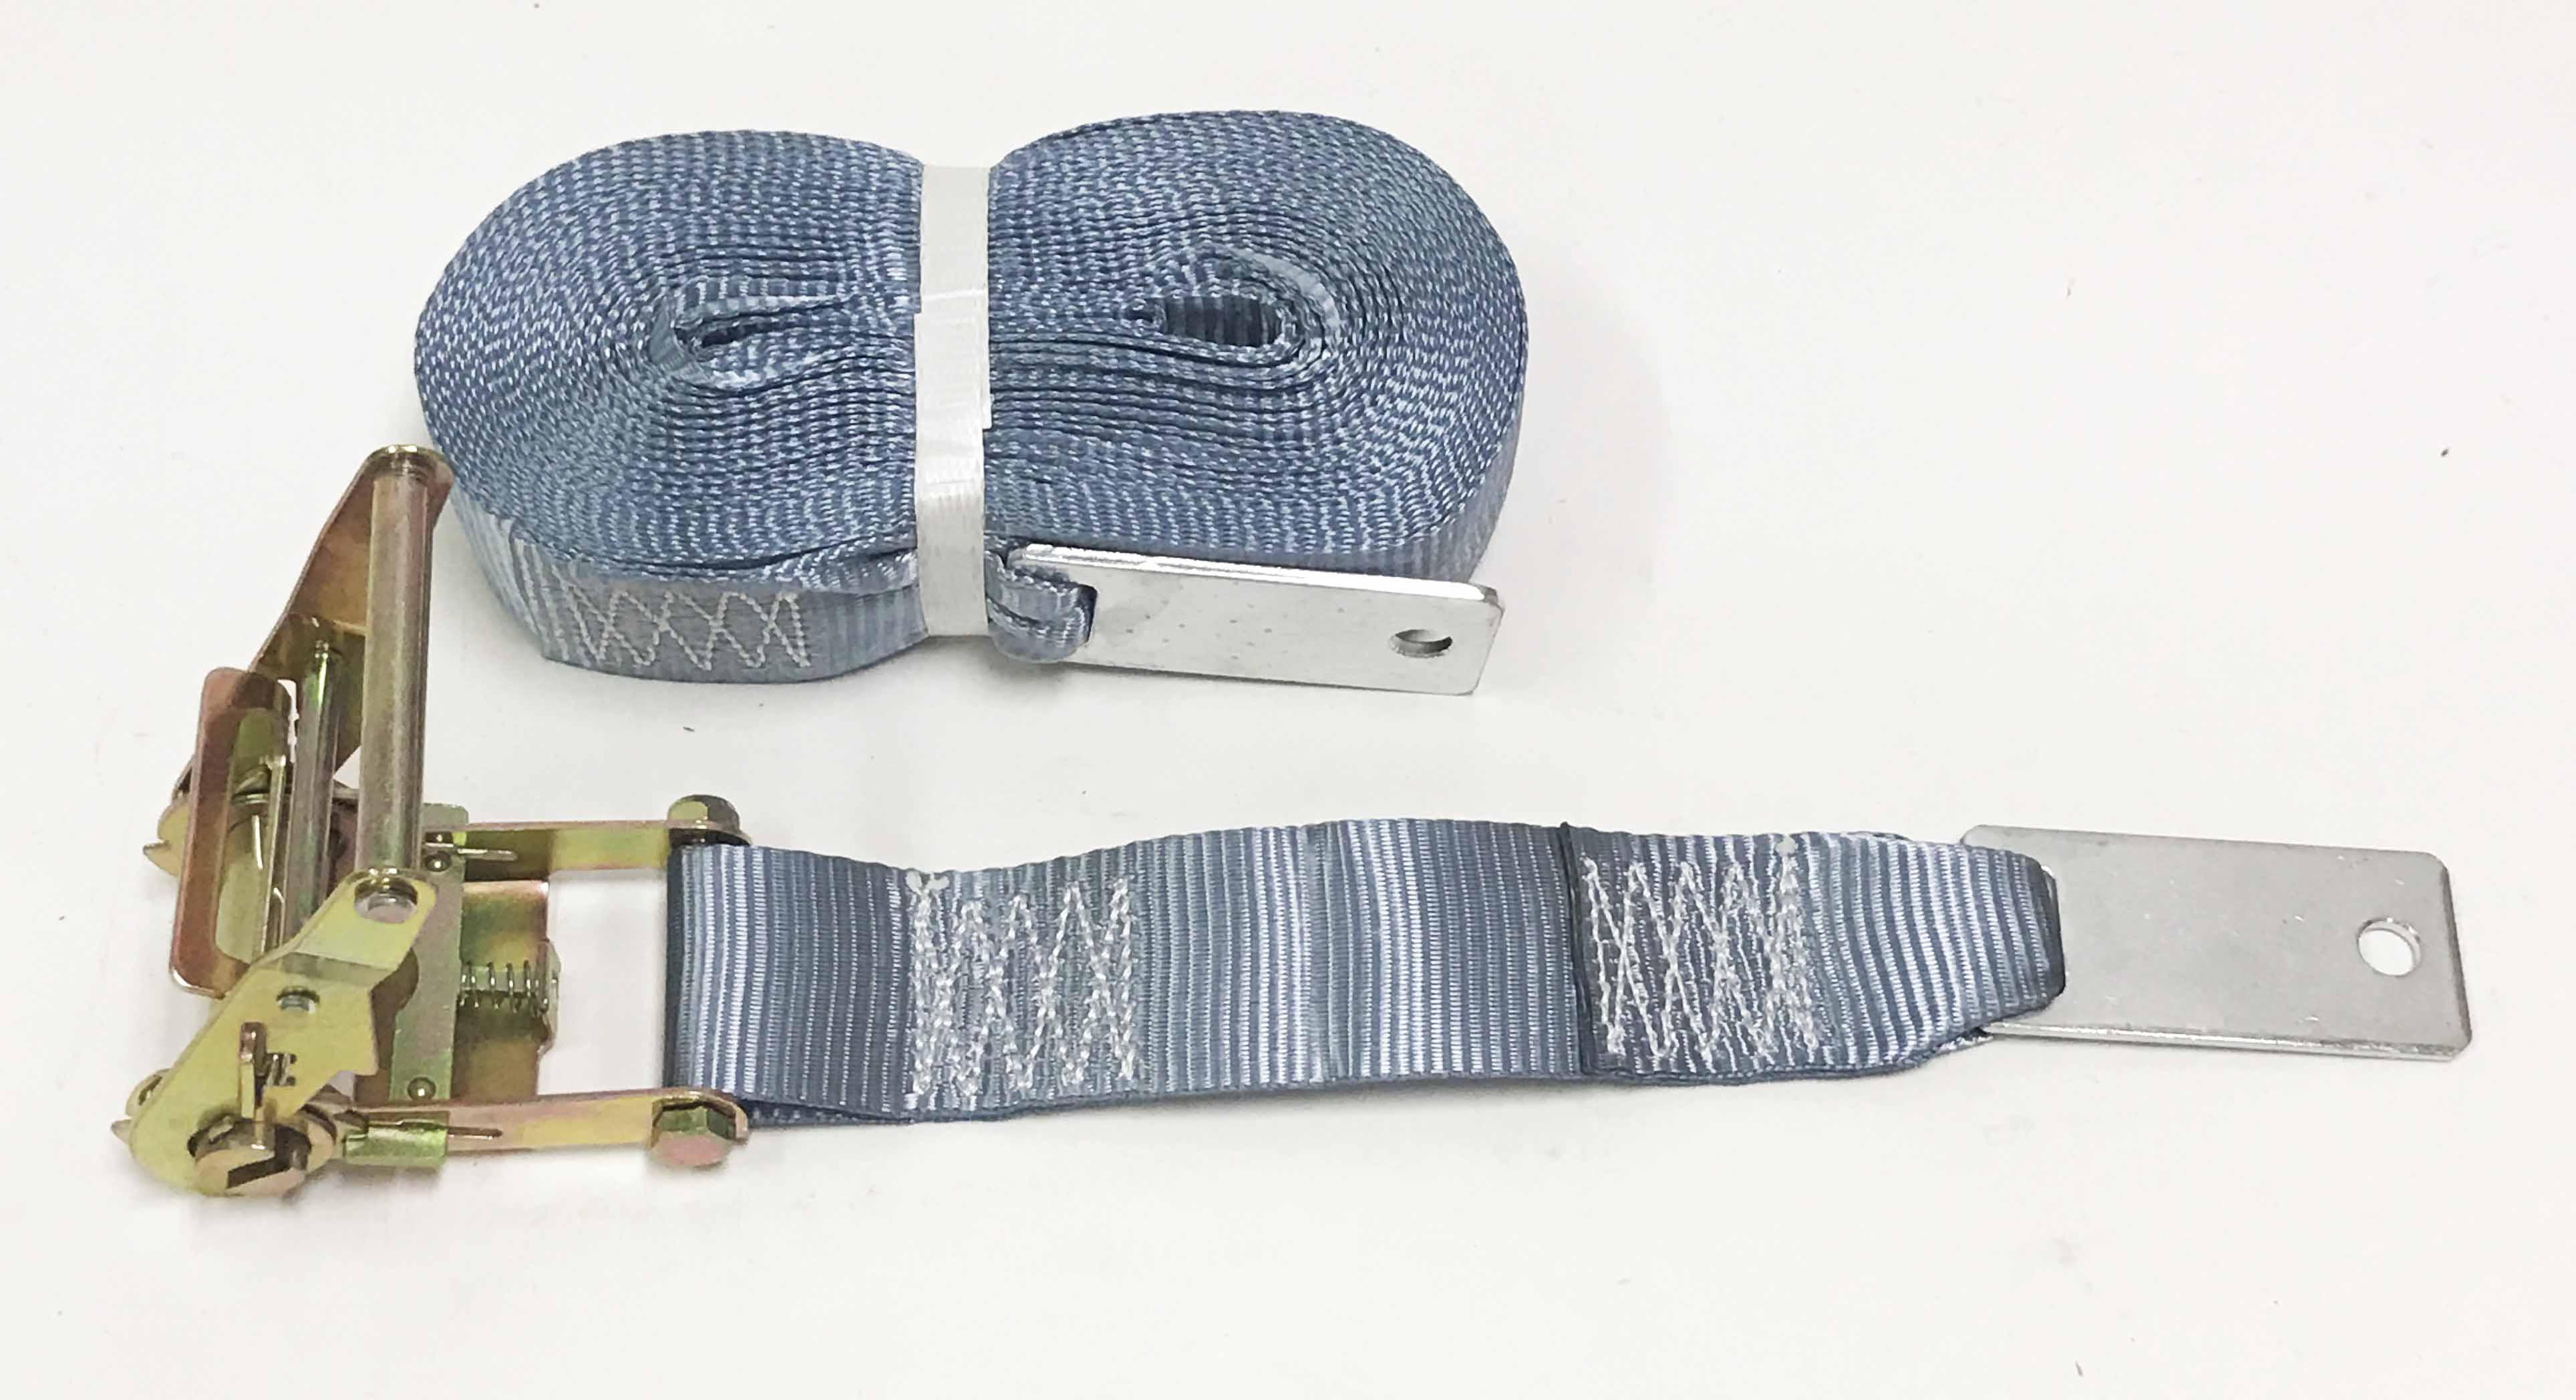 2" X 46' Logistic Ratchet Straps Truck Trailer Tie Down - image 1 of 2